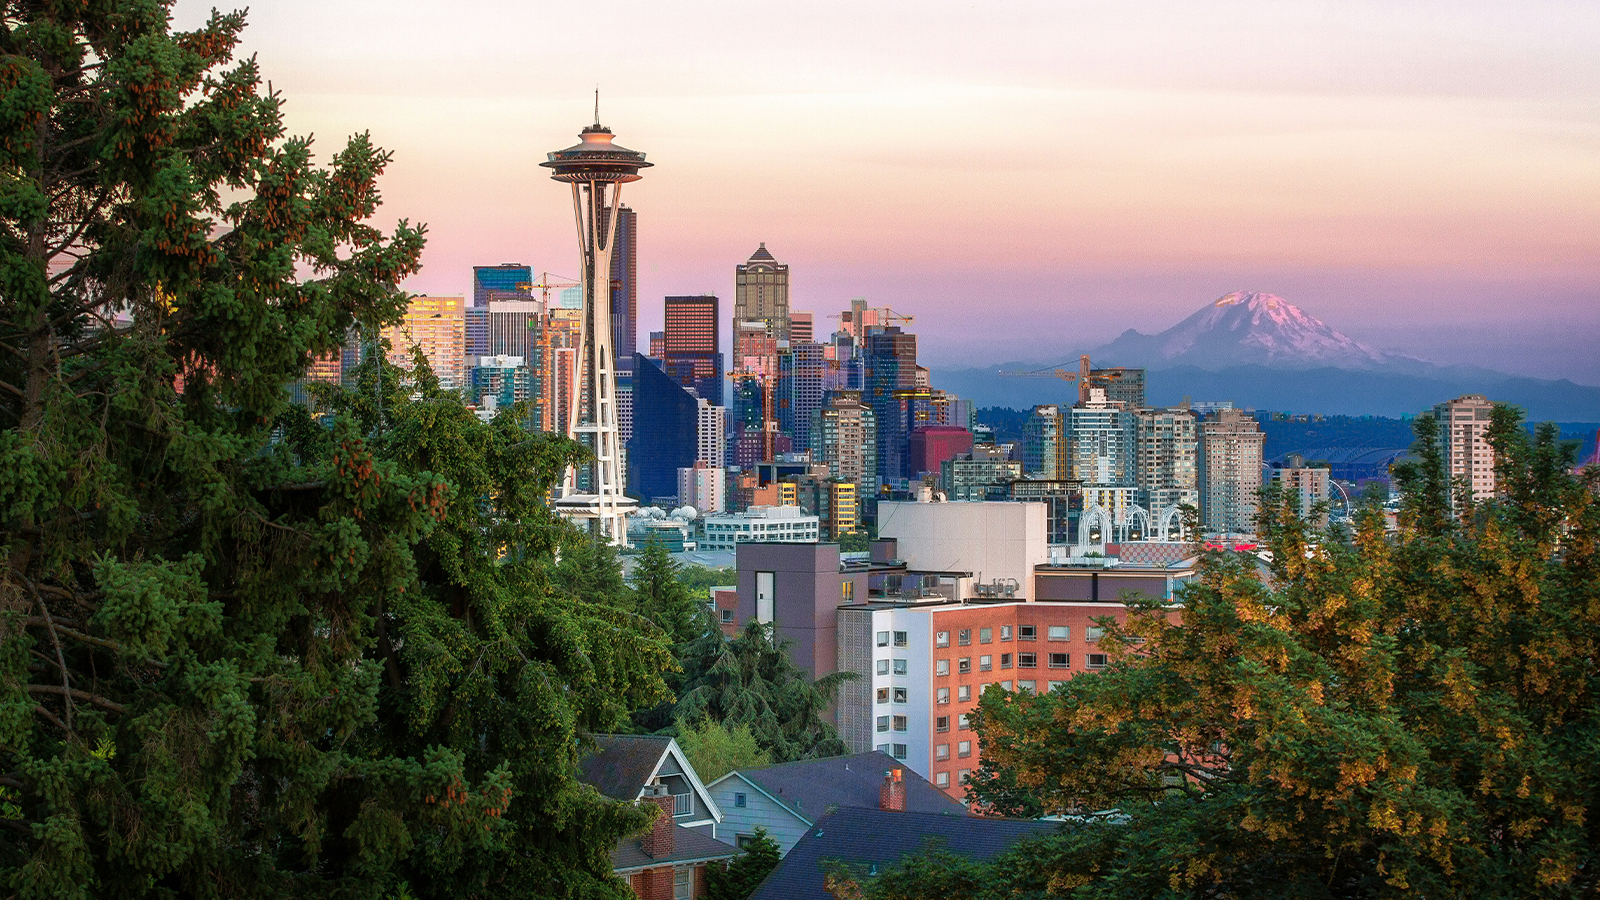 The Seattle skyline at sunset with Mount Rainier in the background and evergreen trees in the foreground.